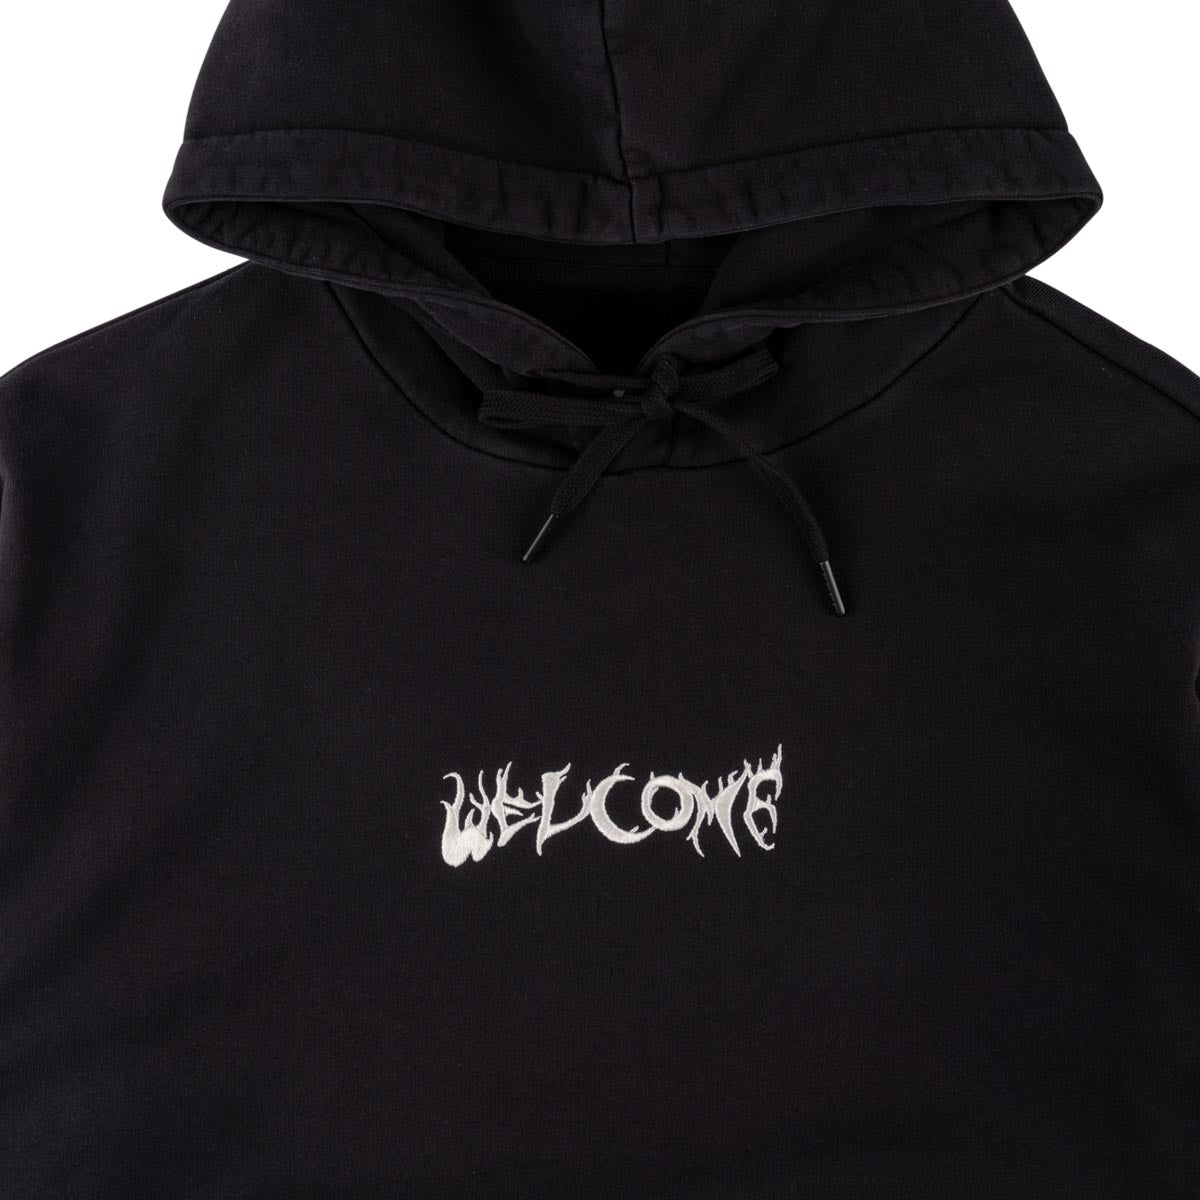 Welcome Light And Easy Patch Hoodie - Black image 3